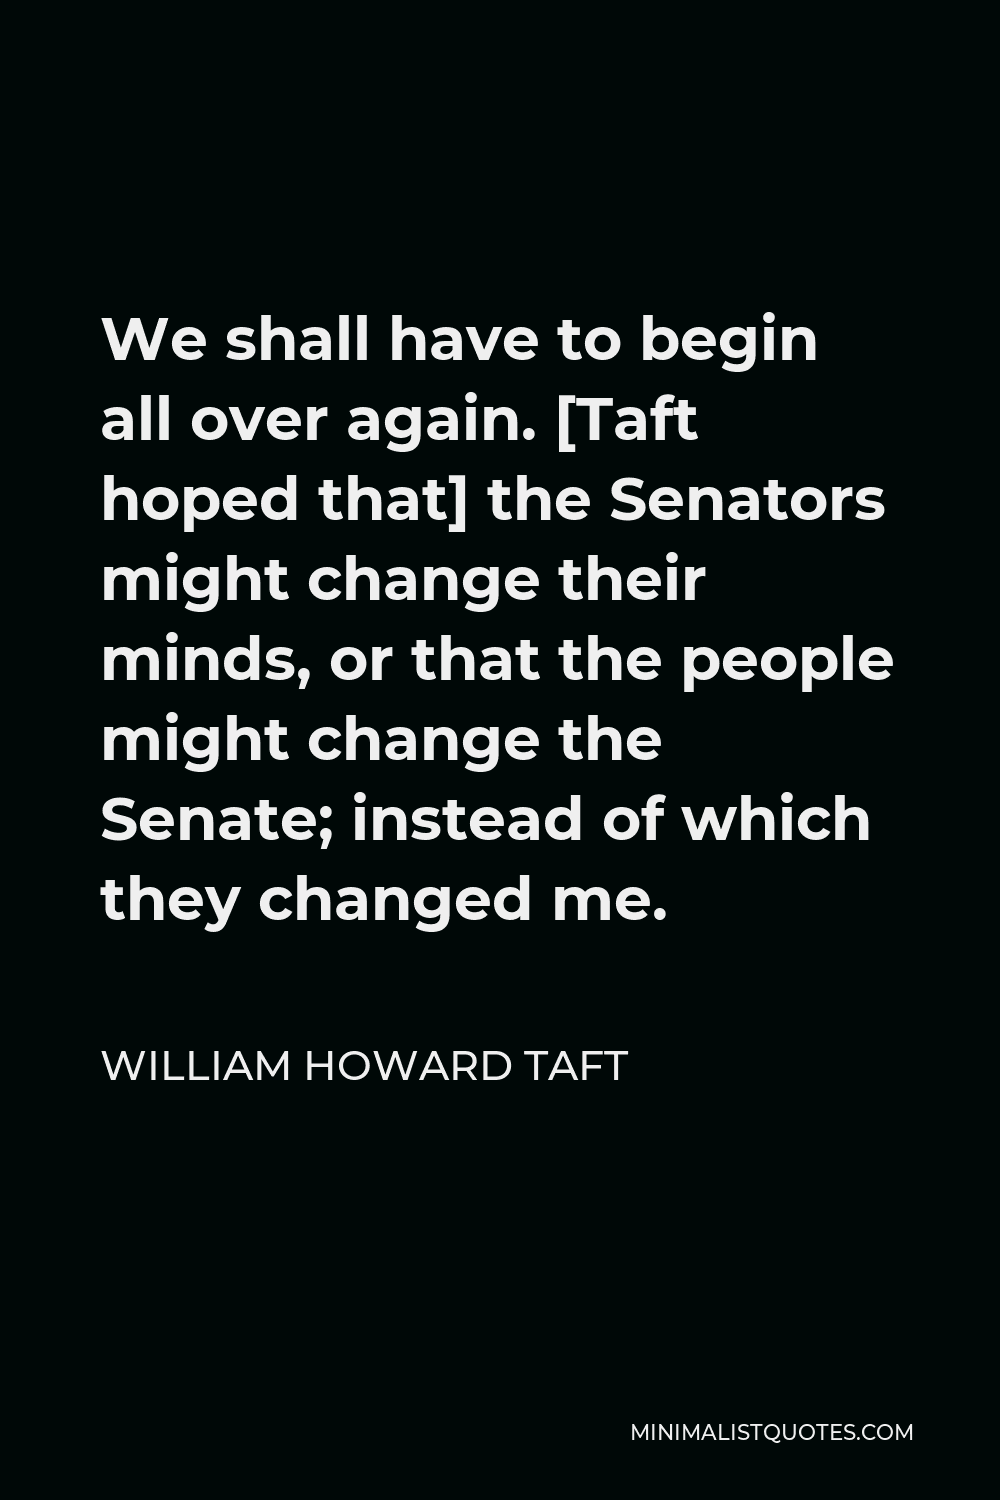 William Howard Taft Quote - We shall have to begin all over again. [Taft hoped that] the Senators might change their minds, or that the people might change the Senate; instead of which they changed me.